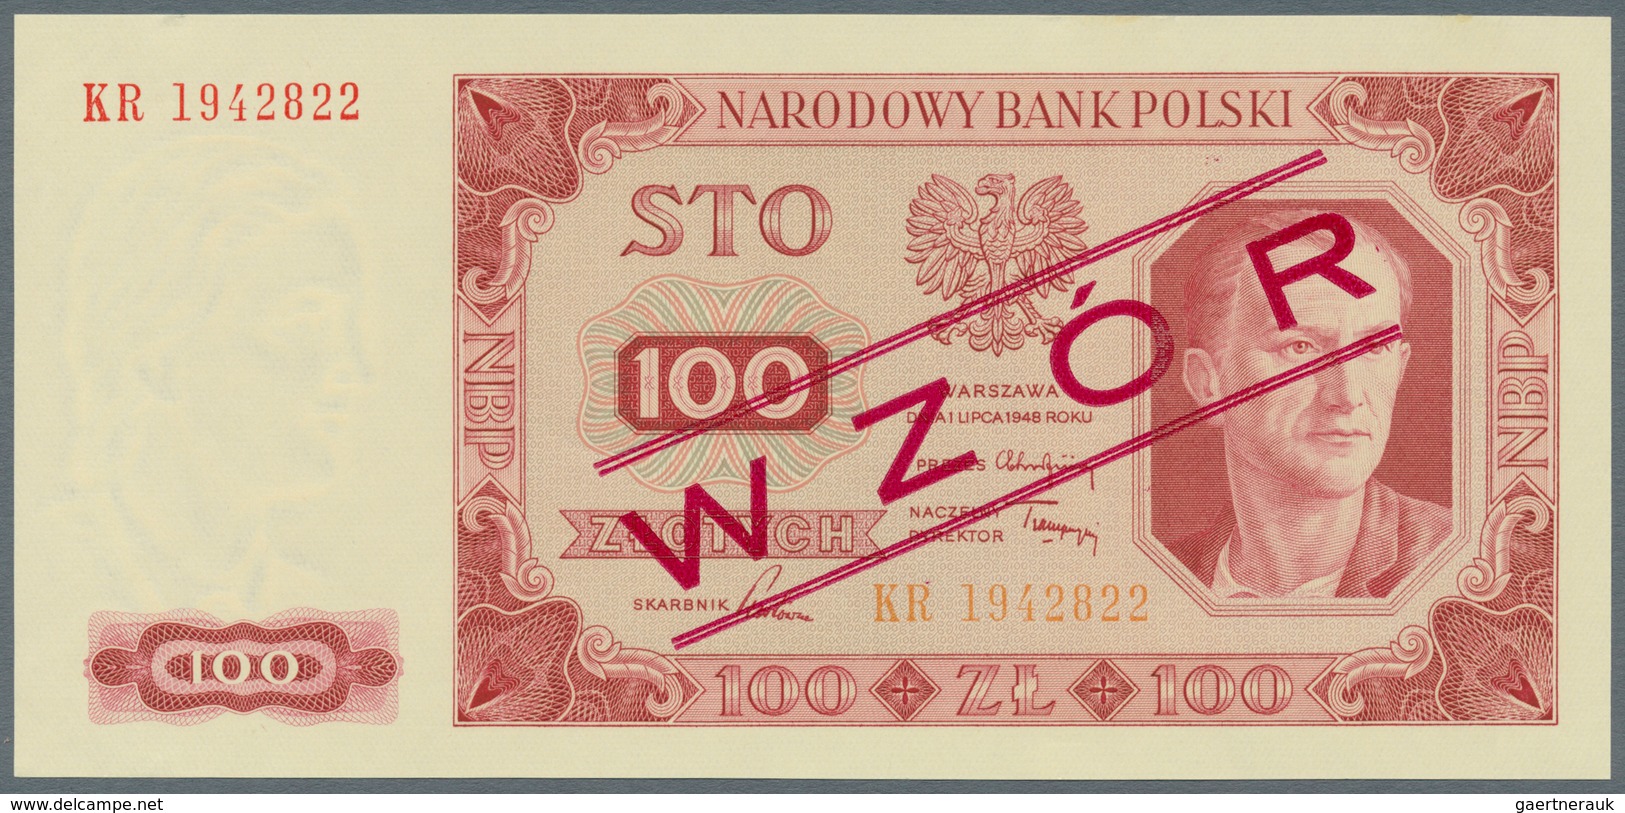 Europa: large collection of about 600 banknotes from Europa in collectors album, mostly in UNC condi